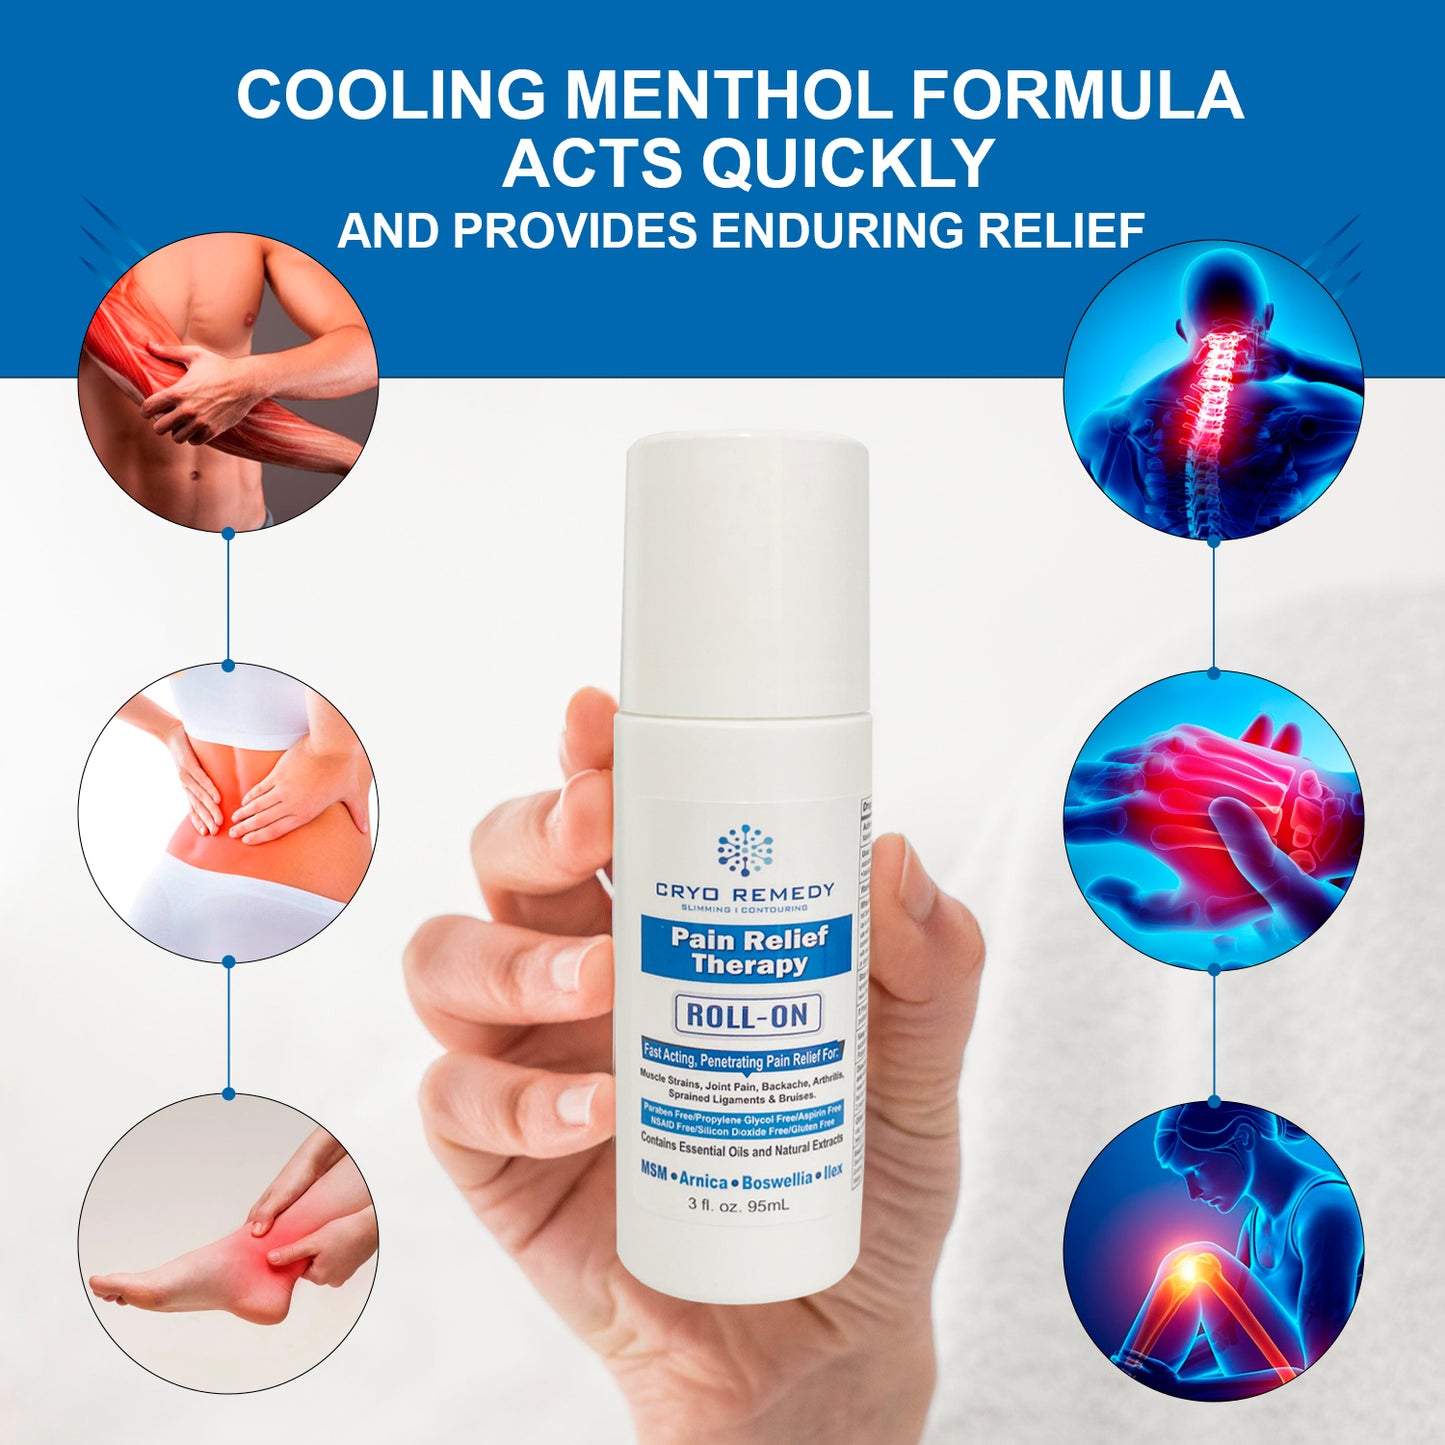 Cryo Remedy® Menthol Roll-On: Topical Pain Relief for Arthritis, Backache, Muscle & Joint Pain